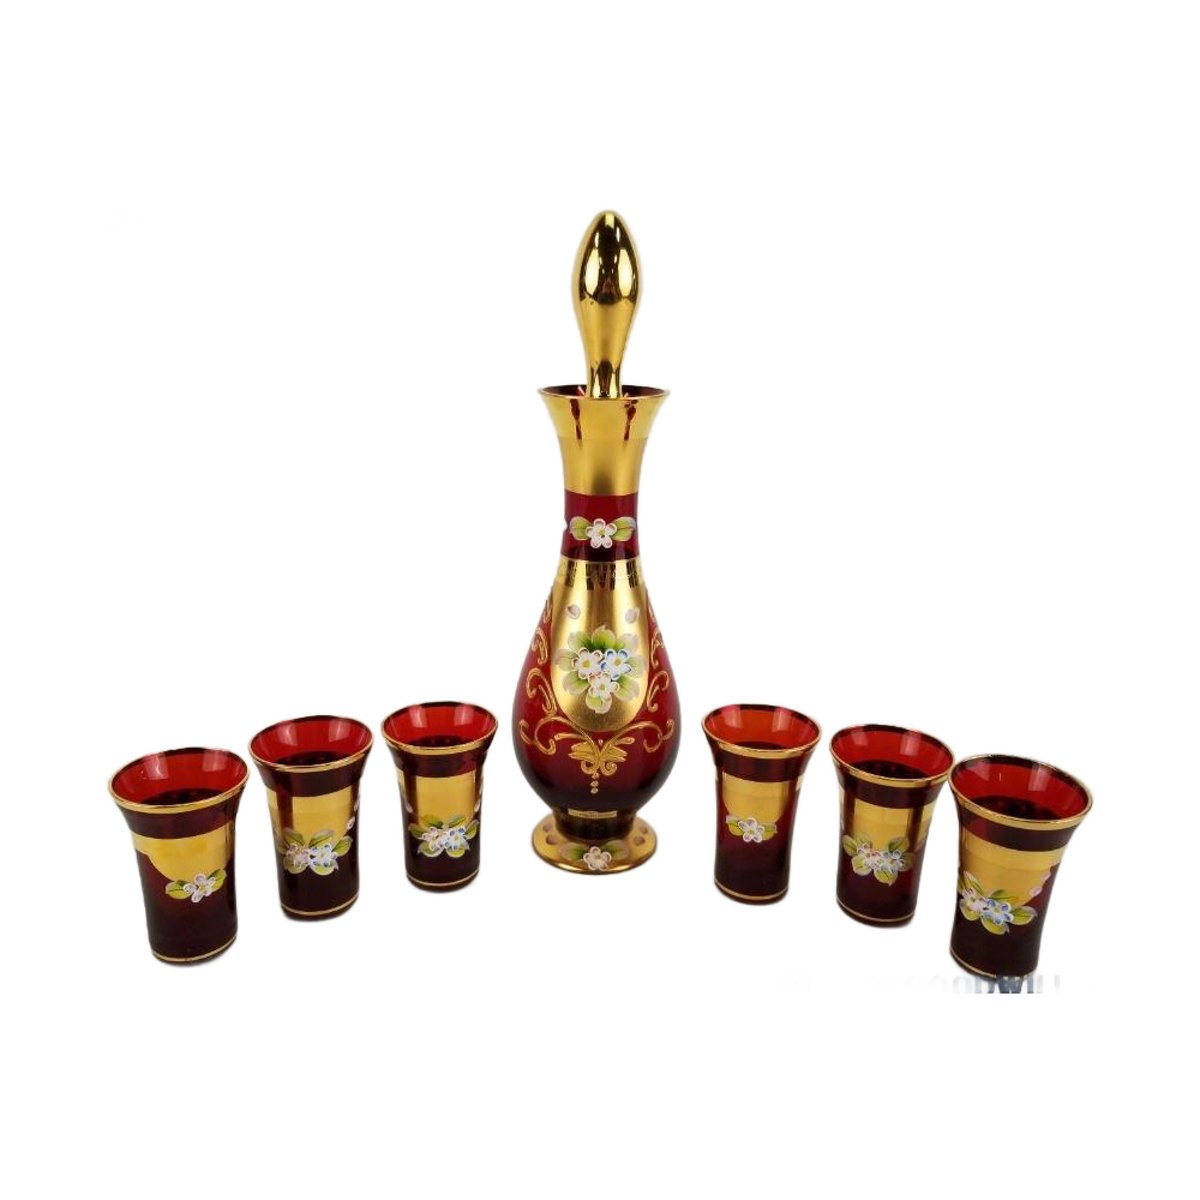 Vintage Victorian Glass Hand Painted Decanter and 6 Glasses by Seyei of Japan, Gold Gilt, 1960s, Free Shipping tuppu.net/e080ff80 #Etsy #JunkYardBlonde #RedDecanterSet